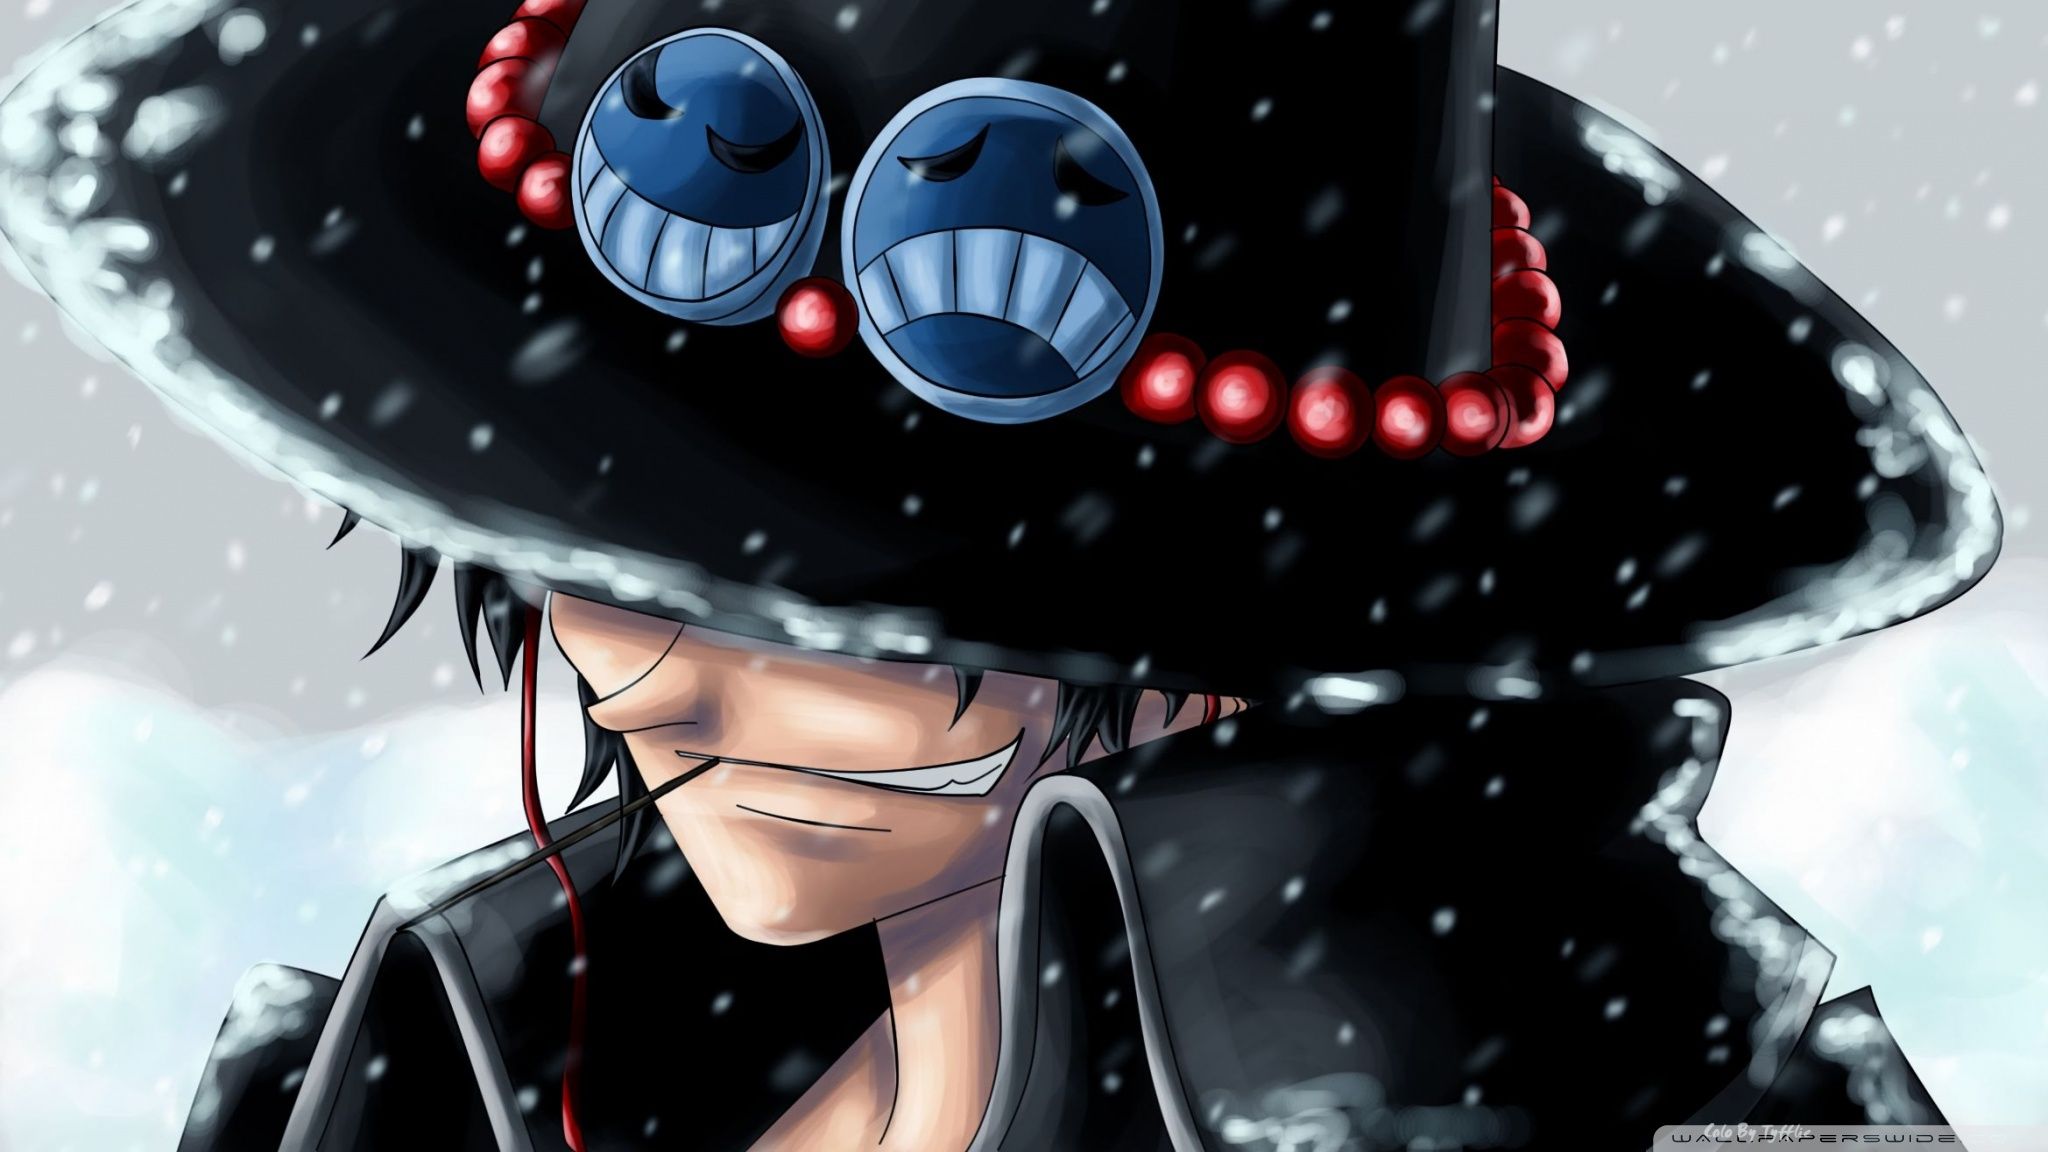 One Piece Wallpapers - Top 45 Best One Piece Backgrounds Download